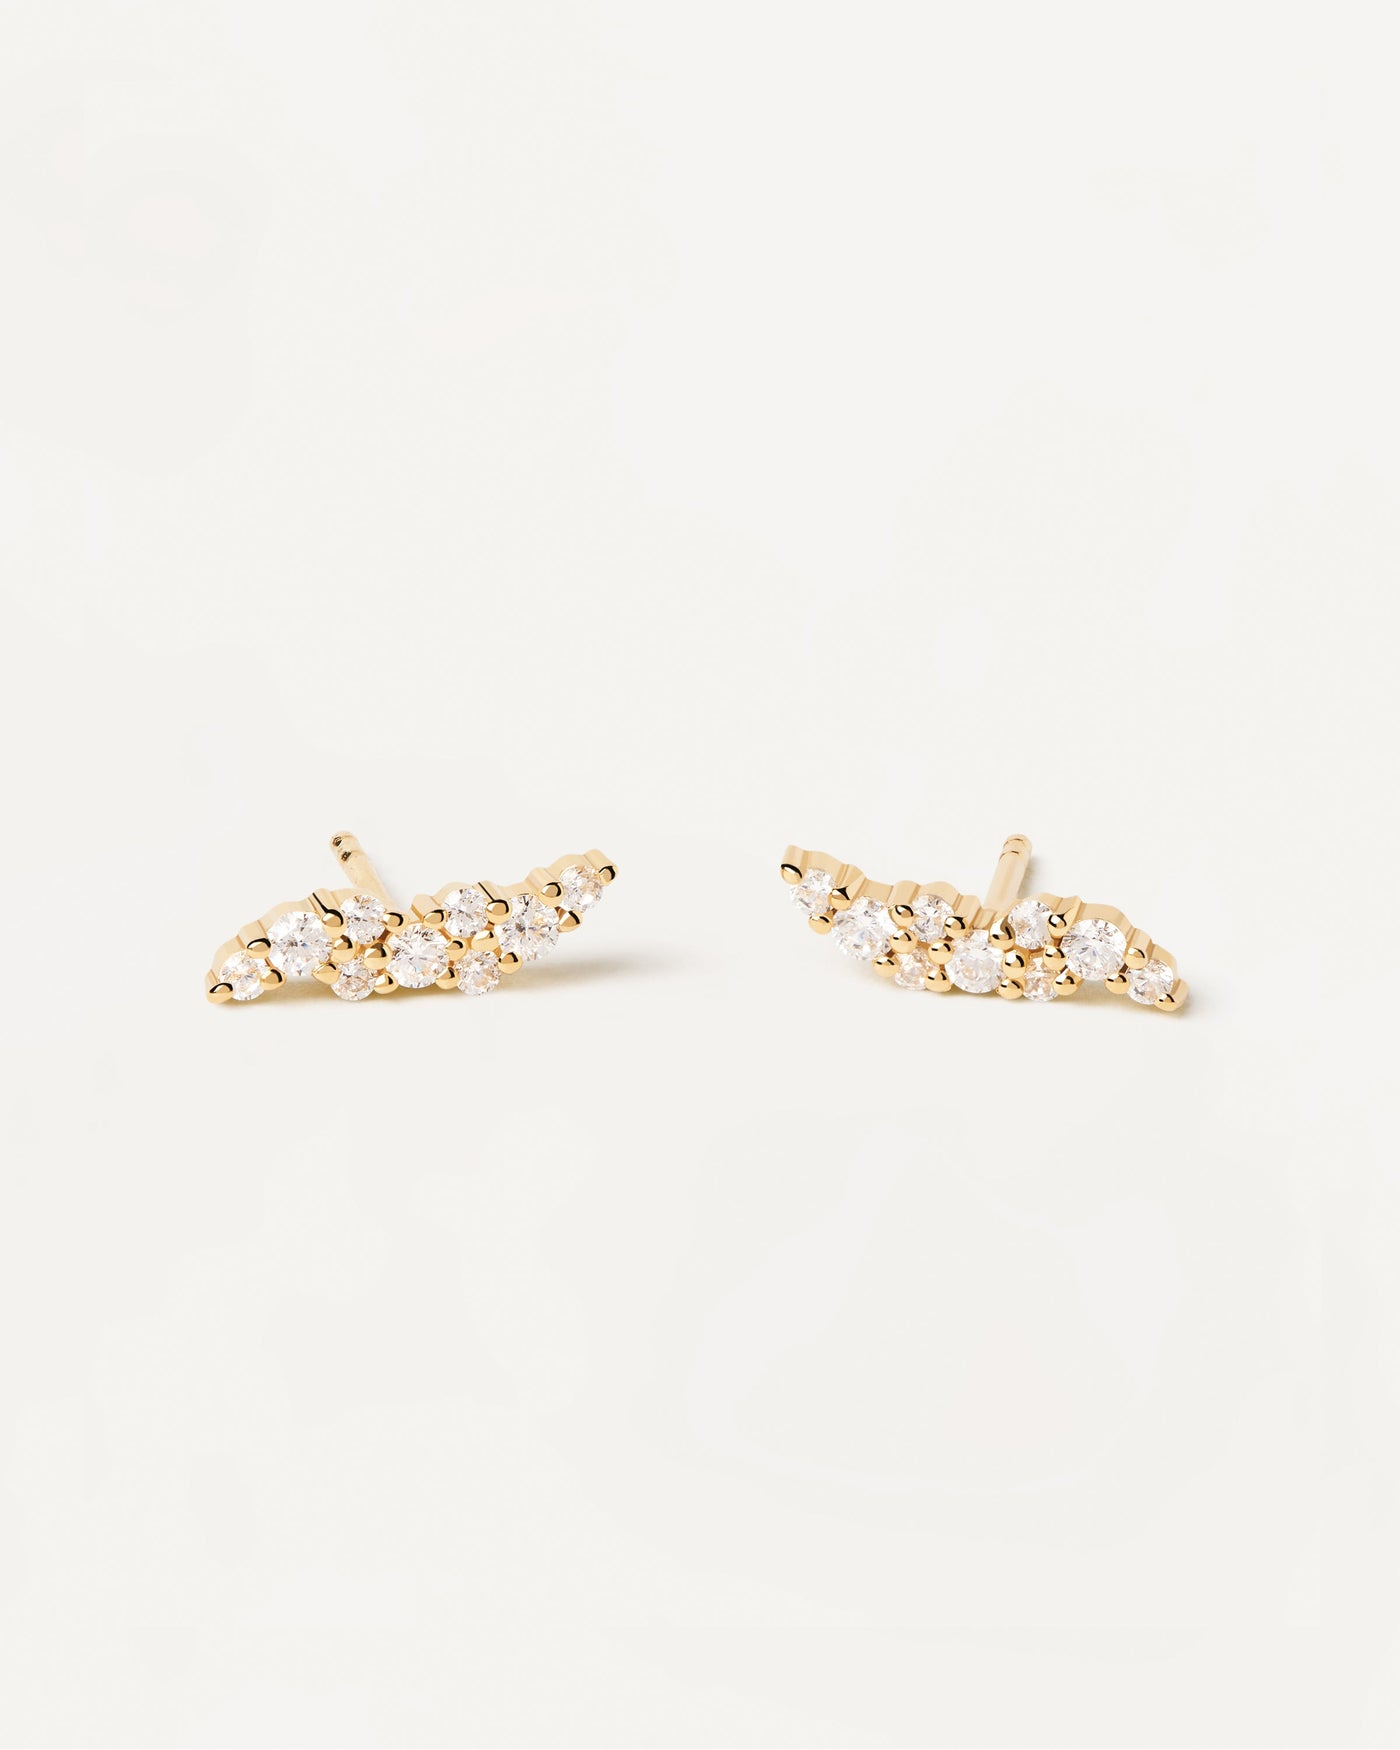 2023 Selection | Natura Earrings. Basic gold-plated silver earrings with small white crystals. Get the latest arrival from PDPAOLA. Place your order safely and get this Best Seller. Free Shipping.